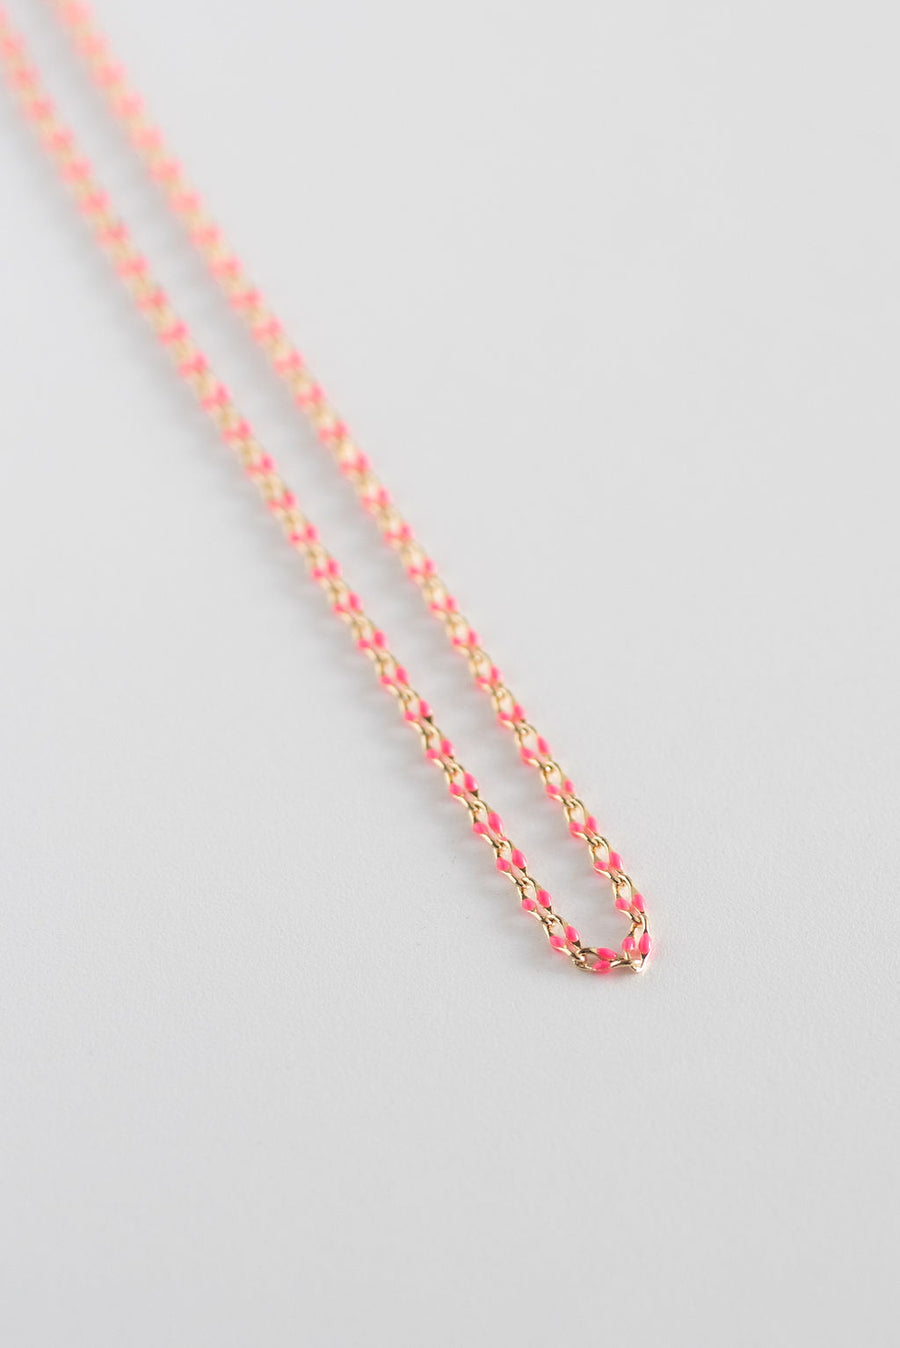 Spring Color Chains